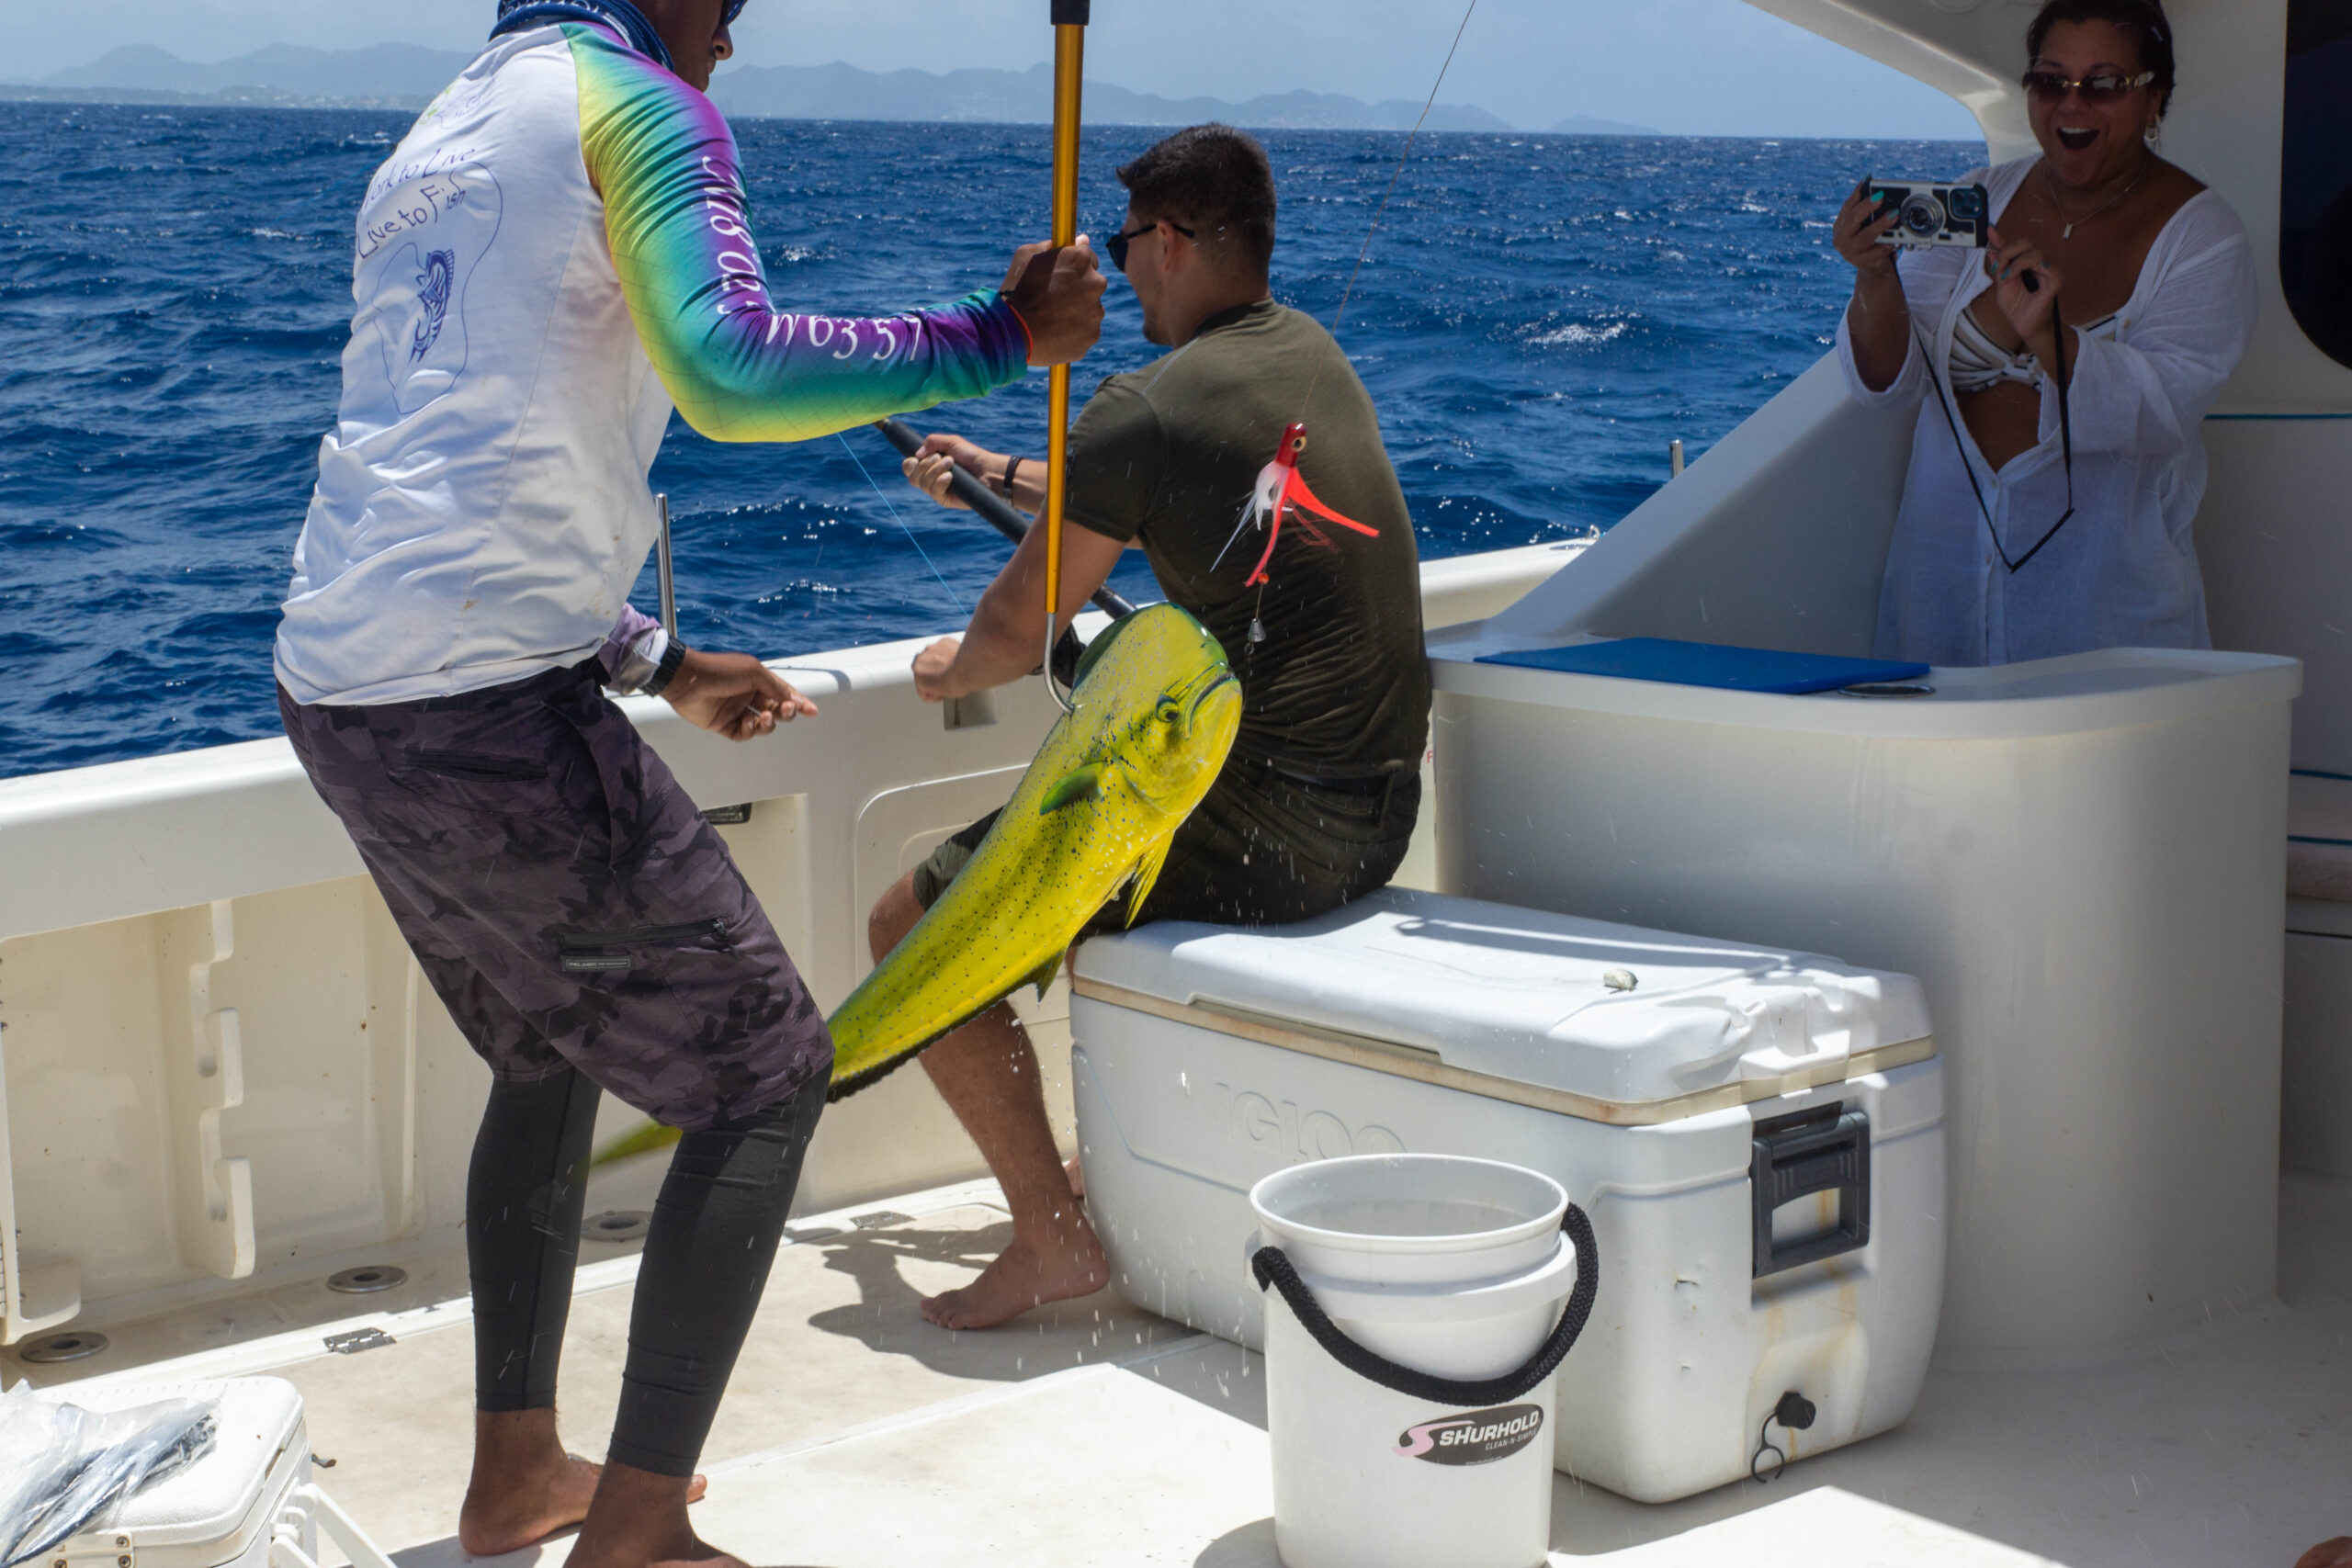 Fully Operational Water Sports, Boat Tour and Charter Business